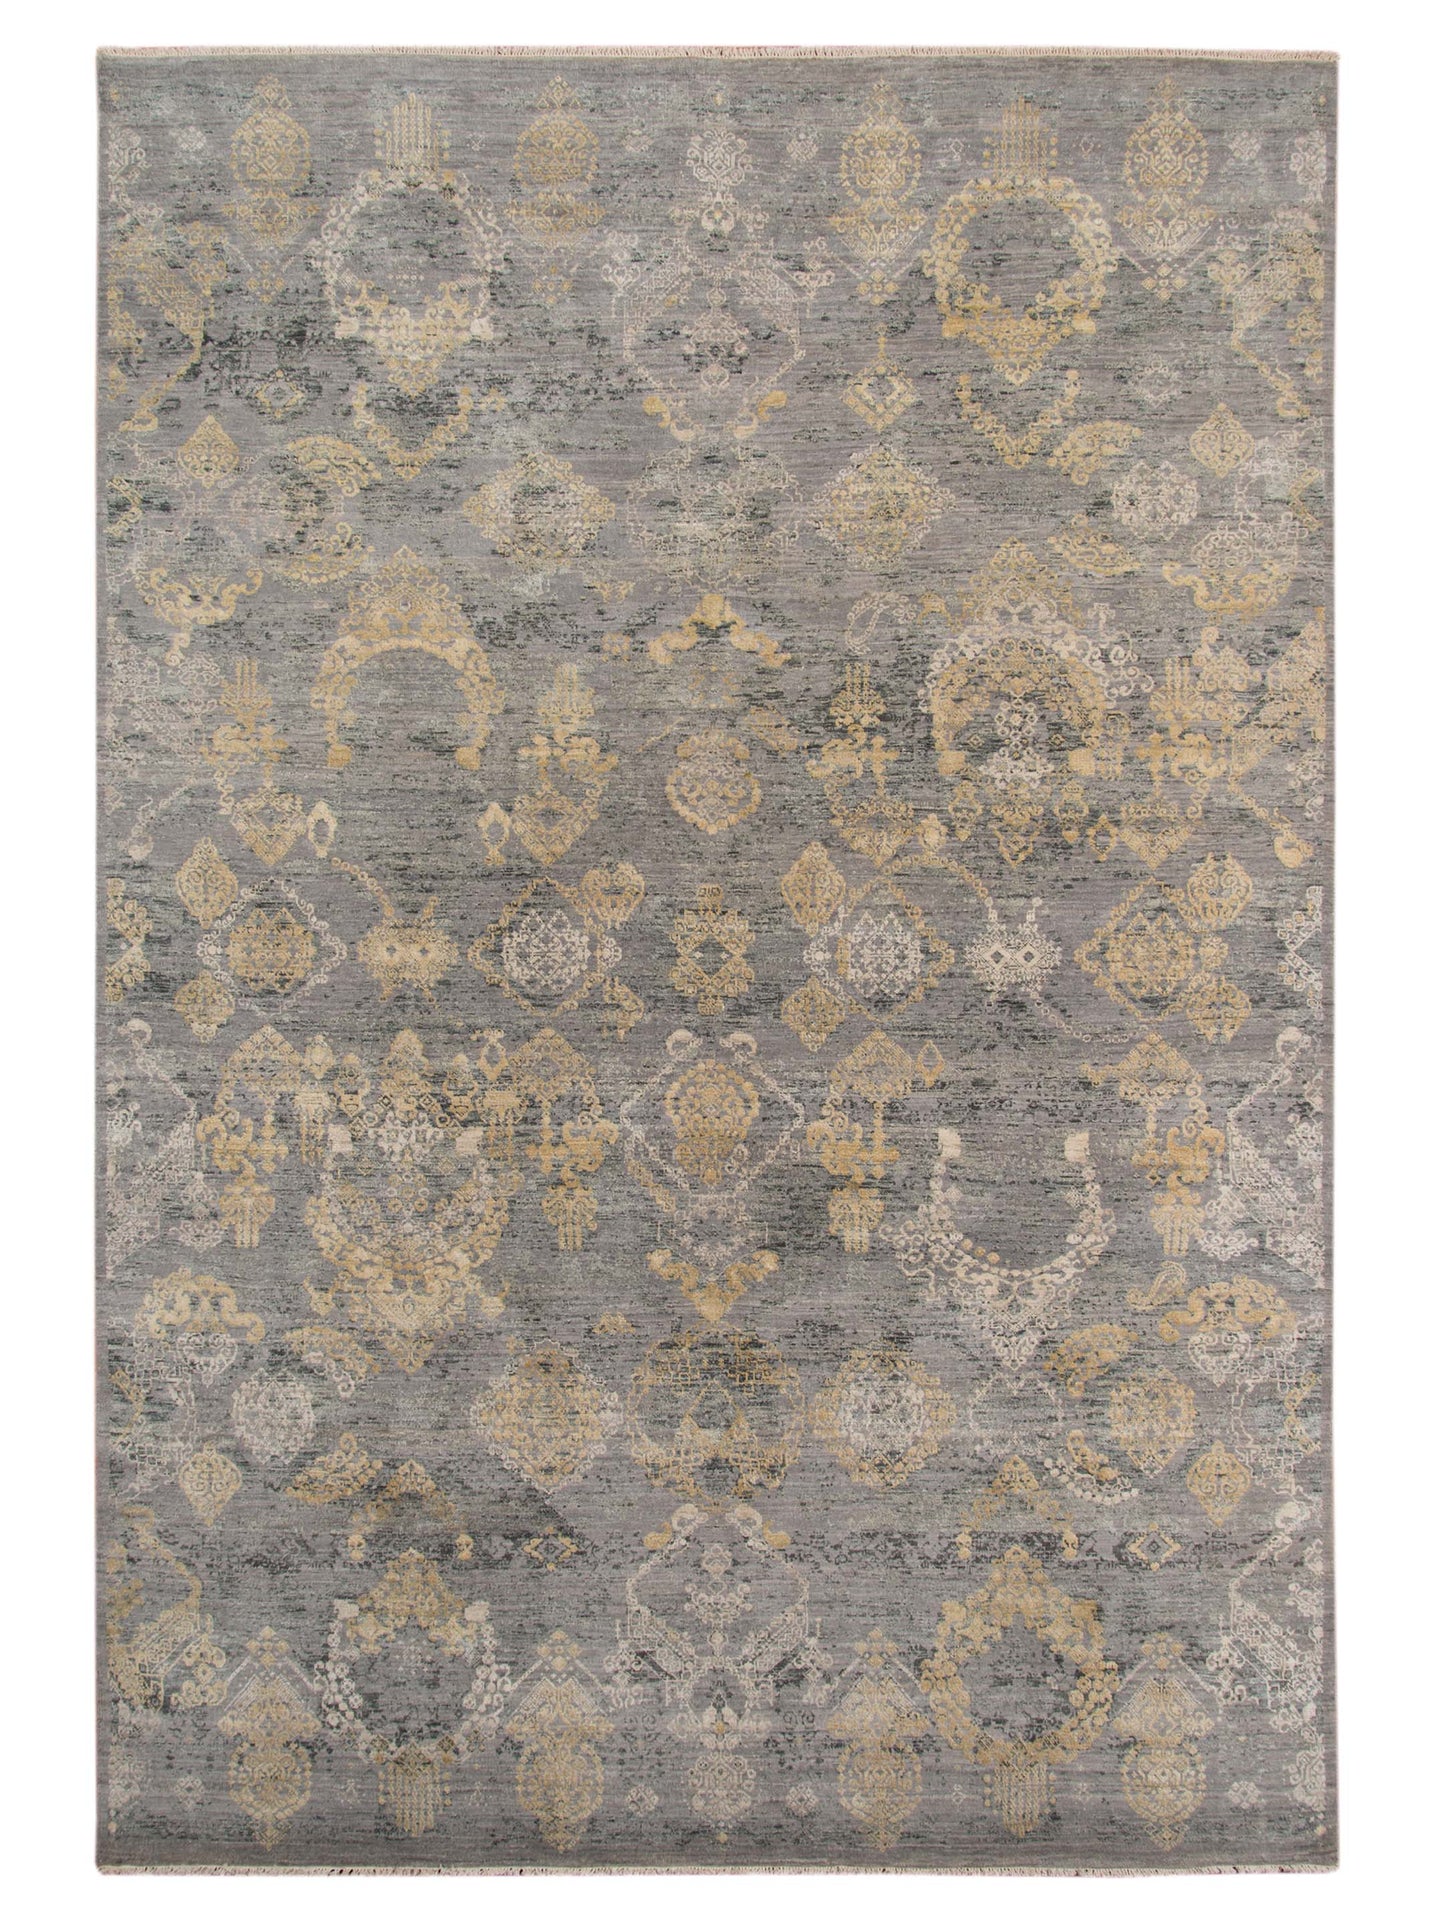 Limited PARKES PA-565 SILVER Transitional Knotted Rug